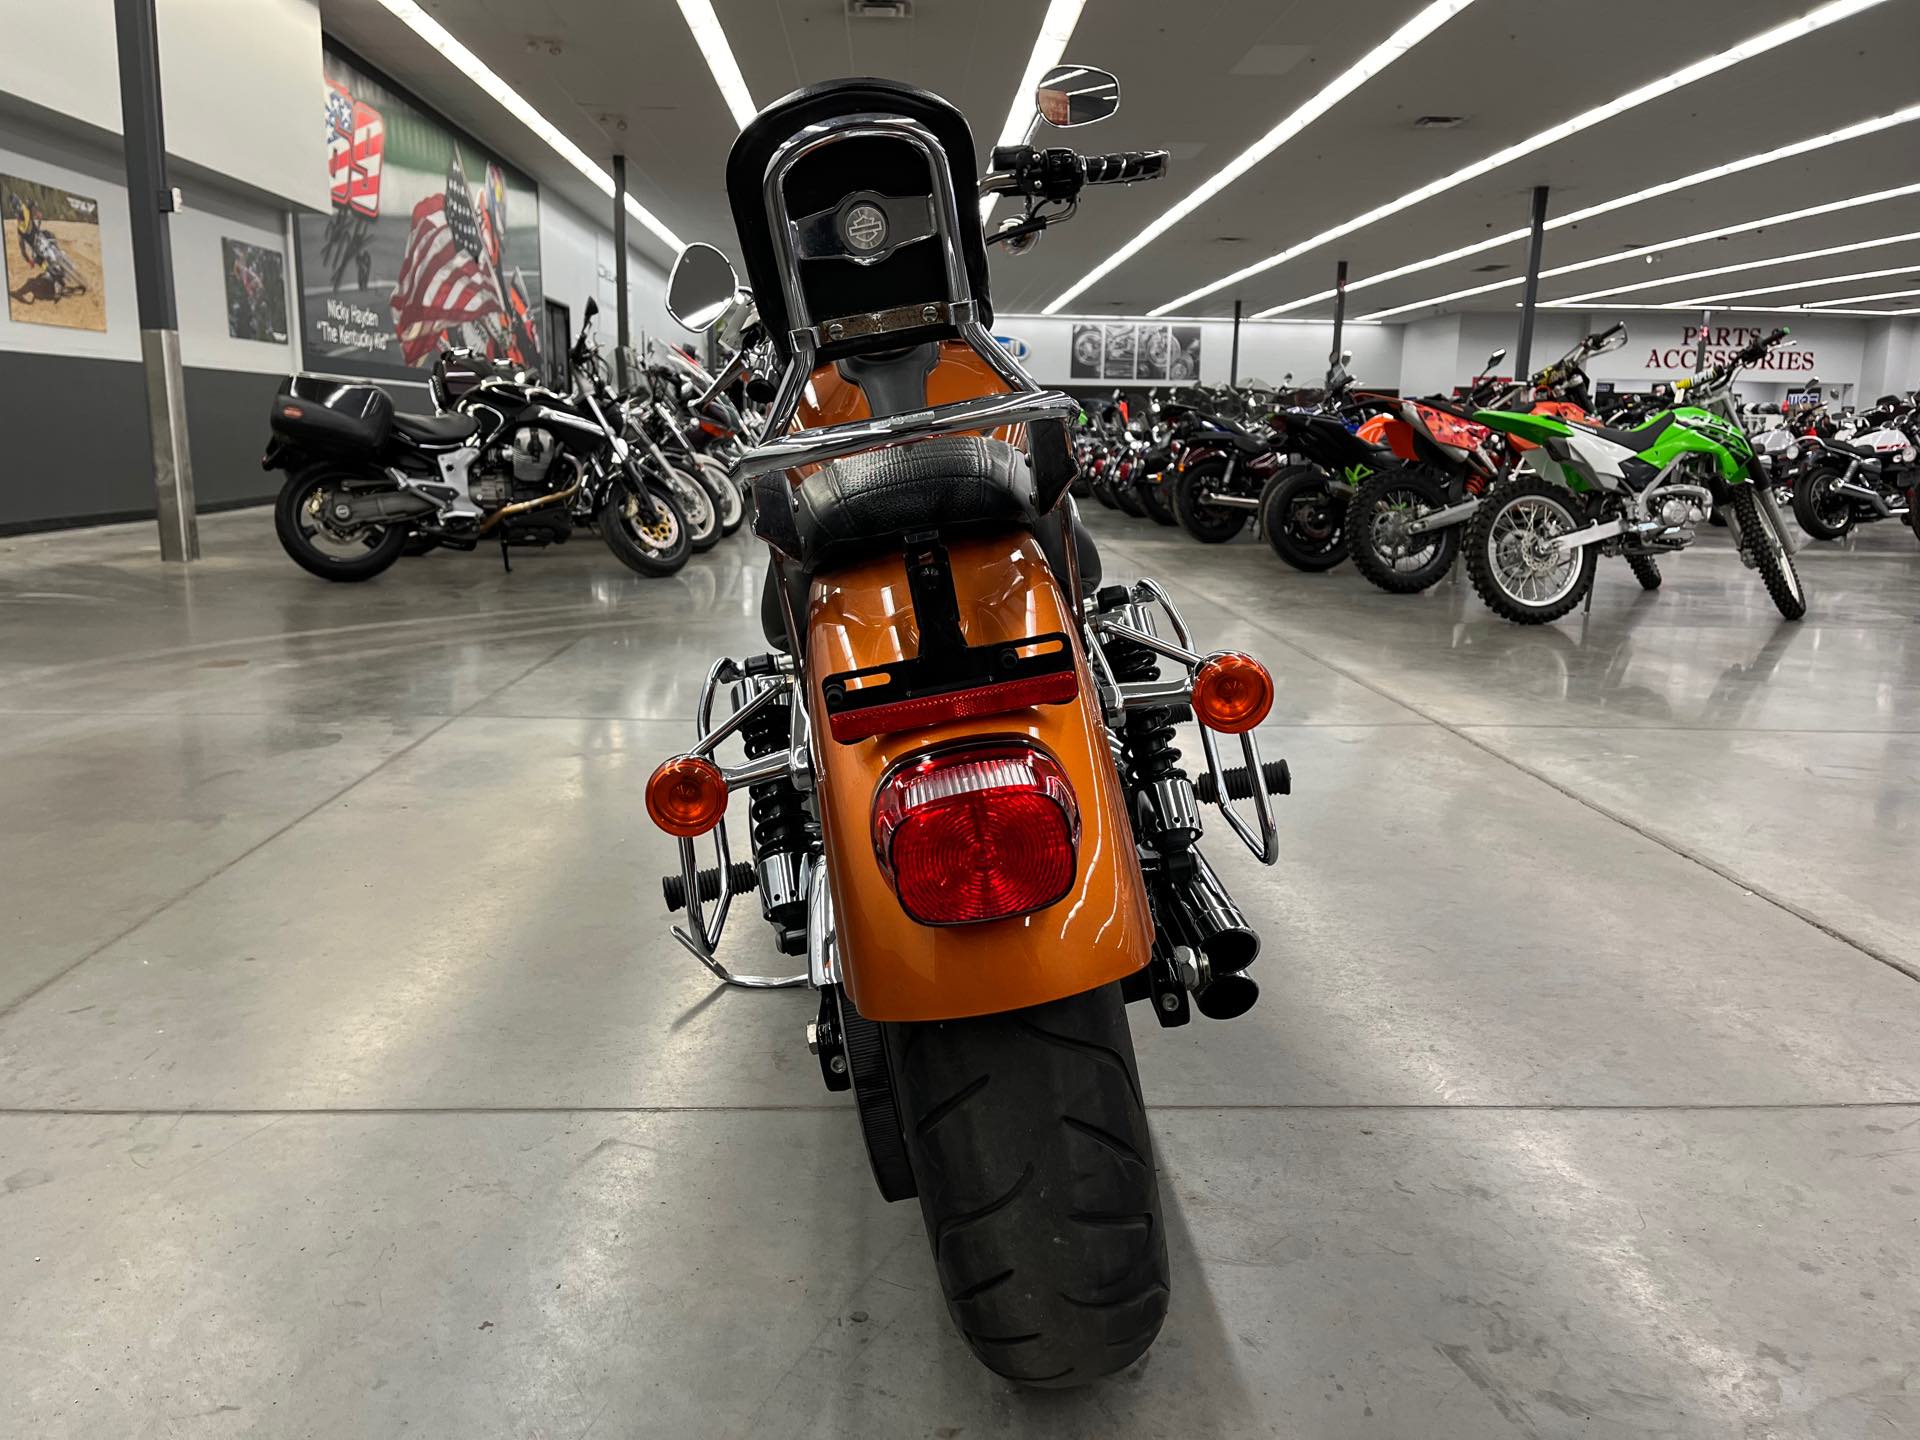 2015 Harley-Davidson Dyna Low Rider at Aces Motorcycles - Denver